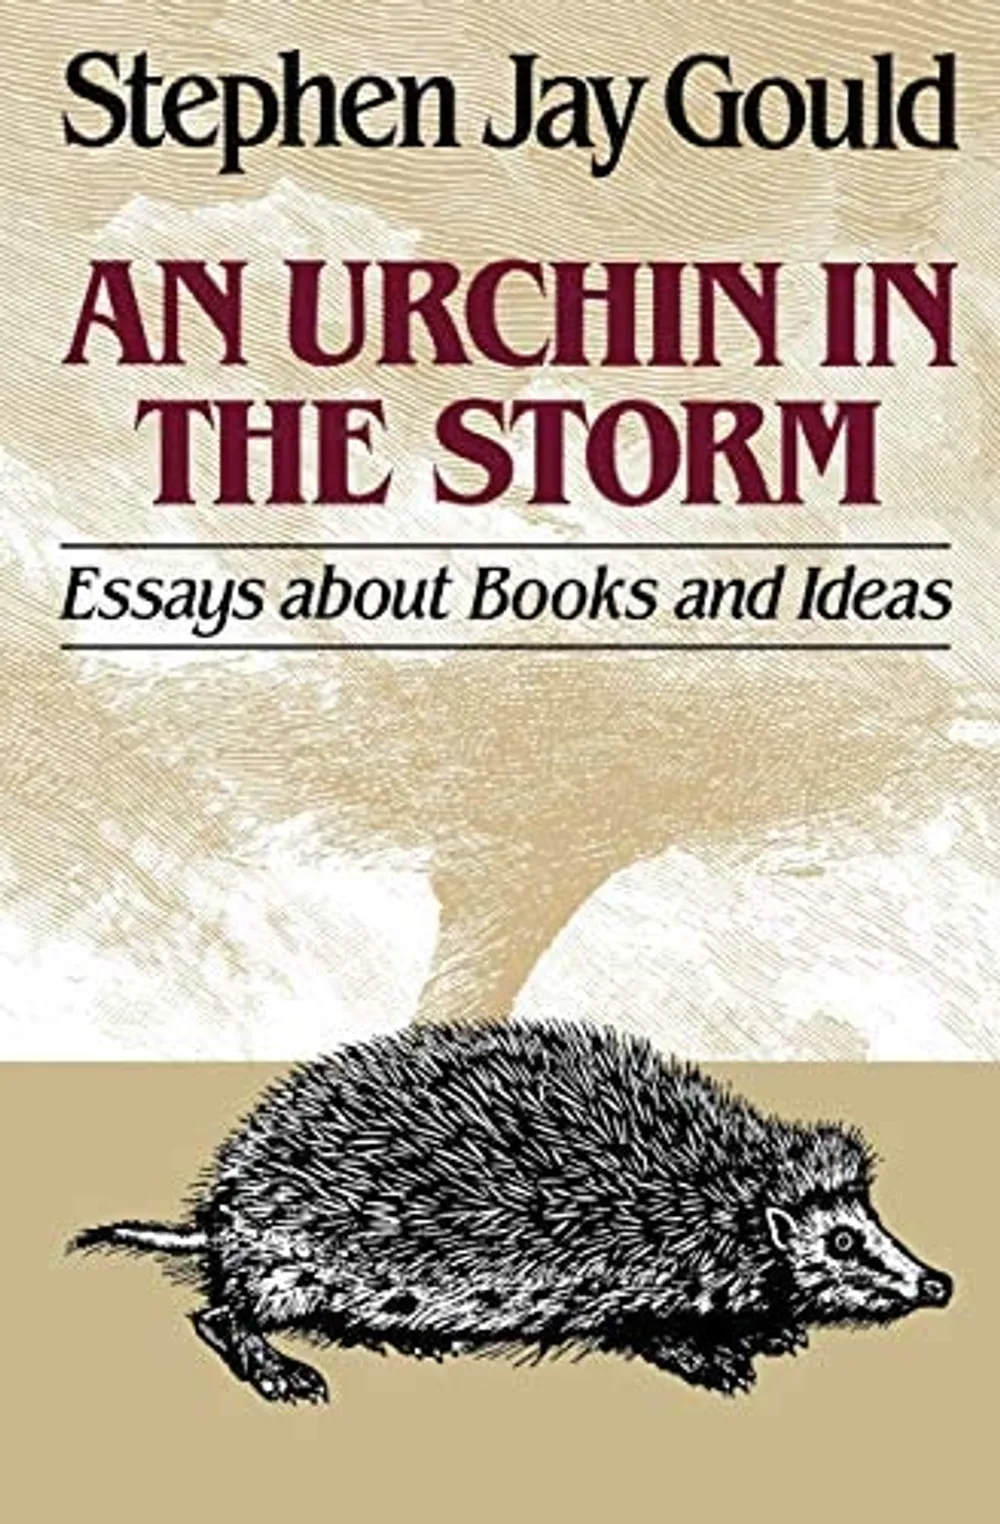 An Urchin in the Storm, by Stephen Jay Gould